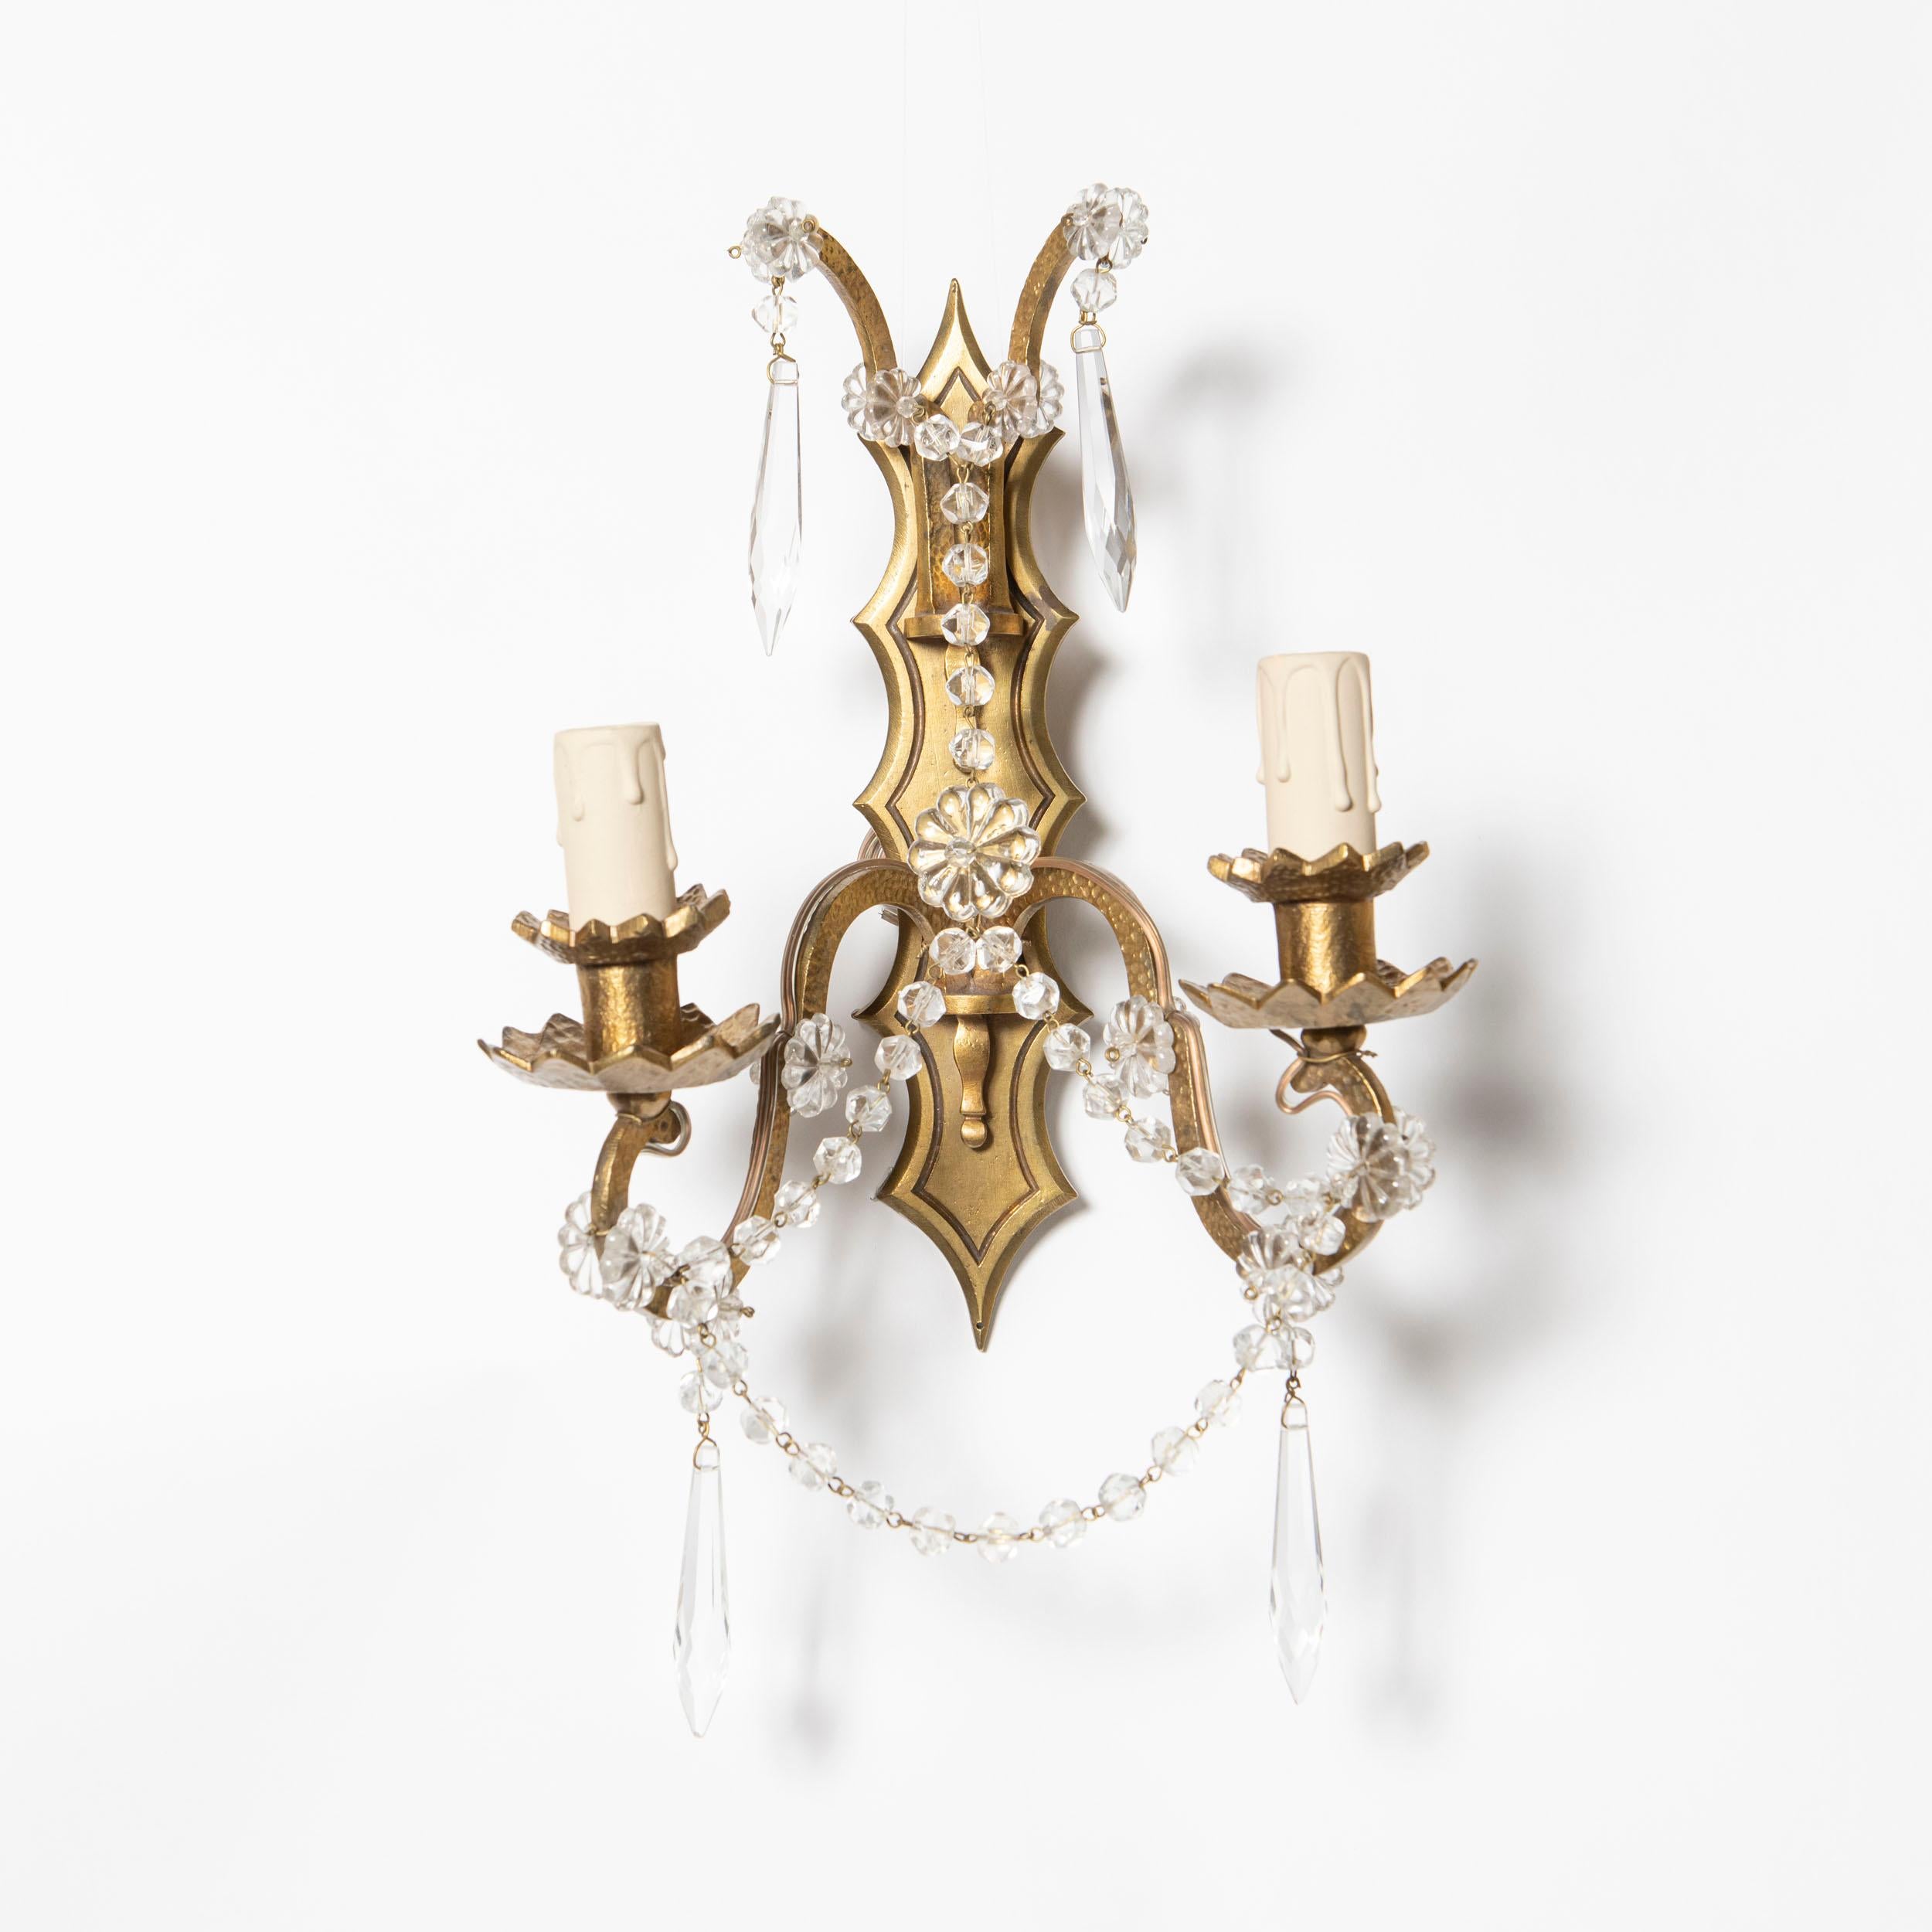 Pair of gilt bronze and crystal sconces signed Sabino France, circa 1940.